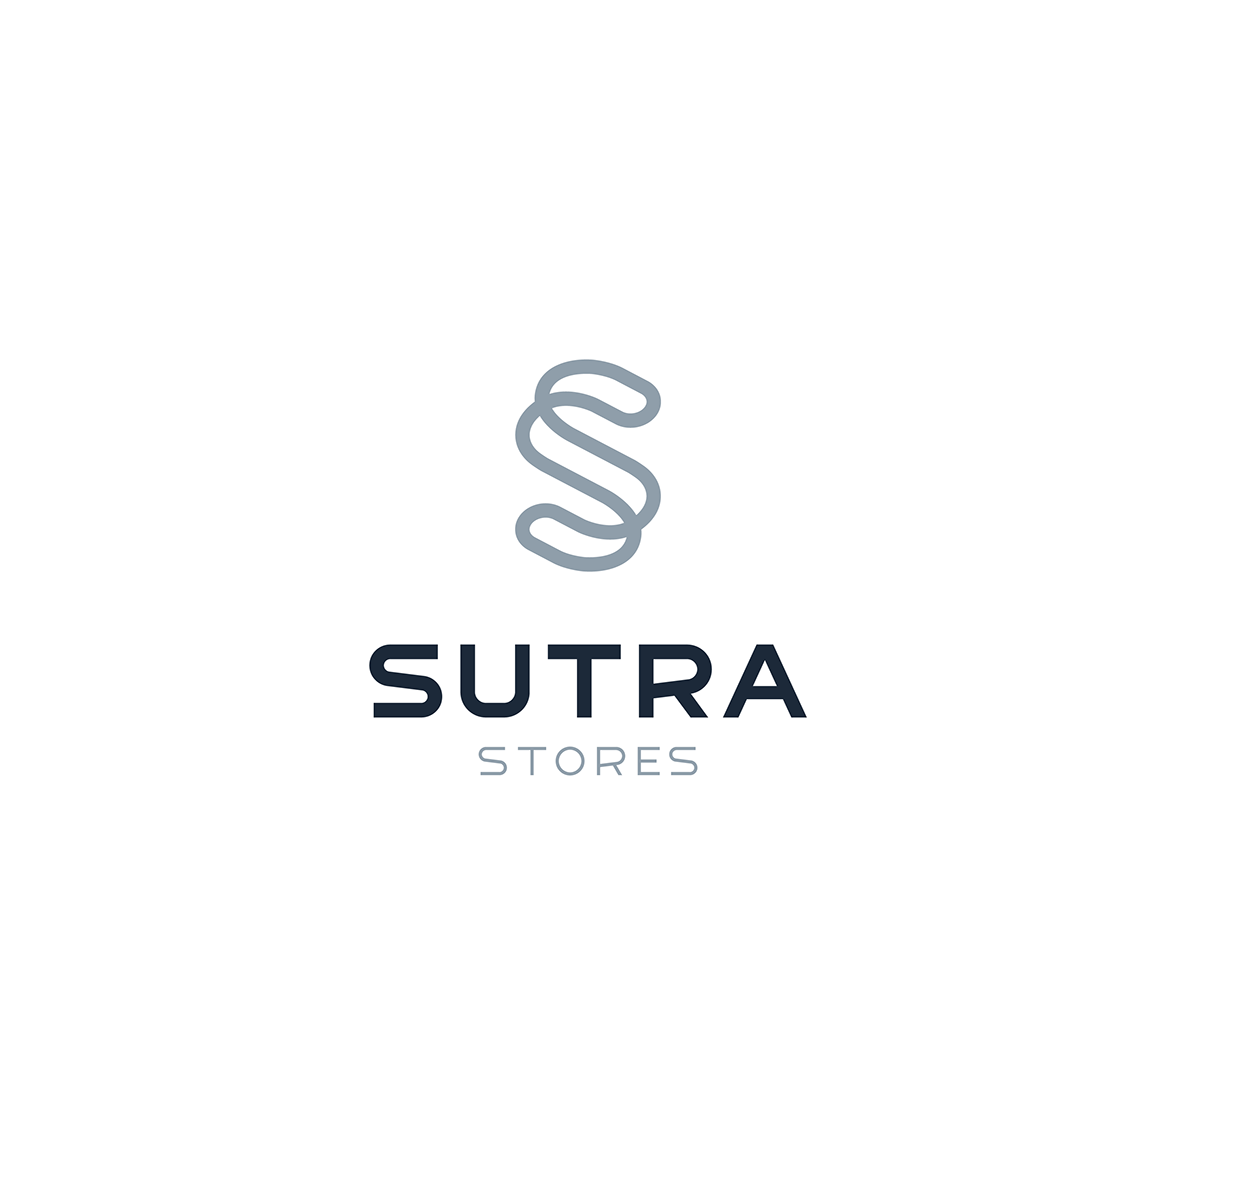 Sutra Stores